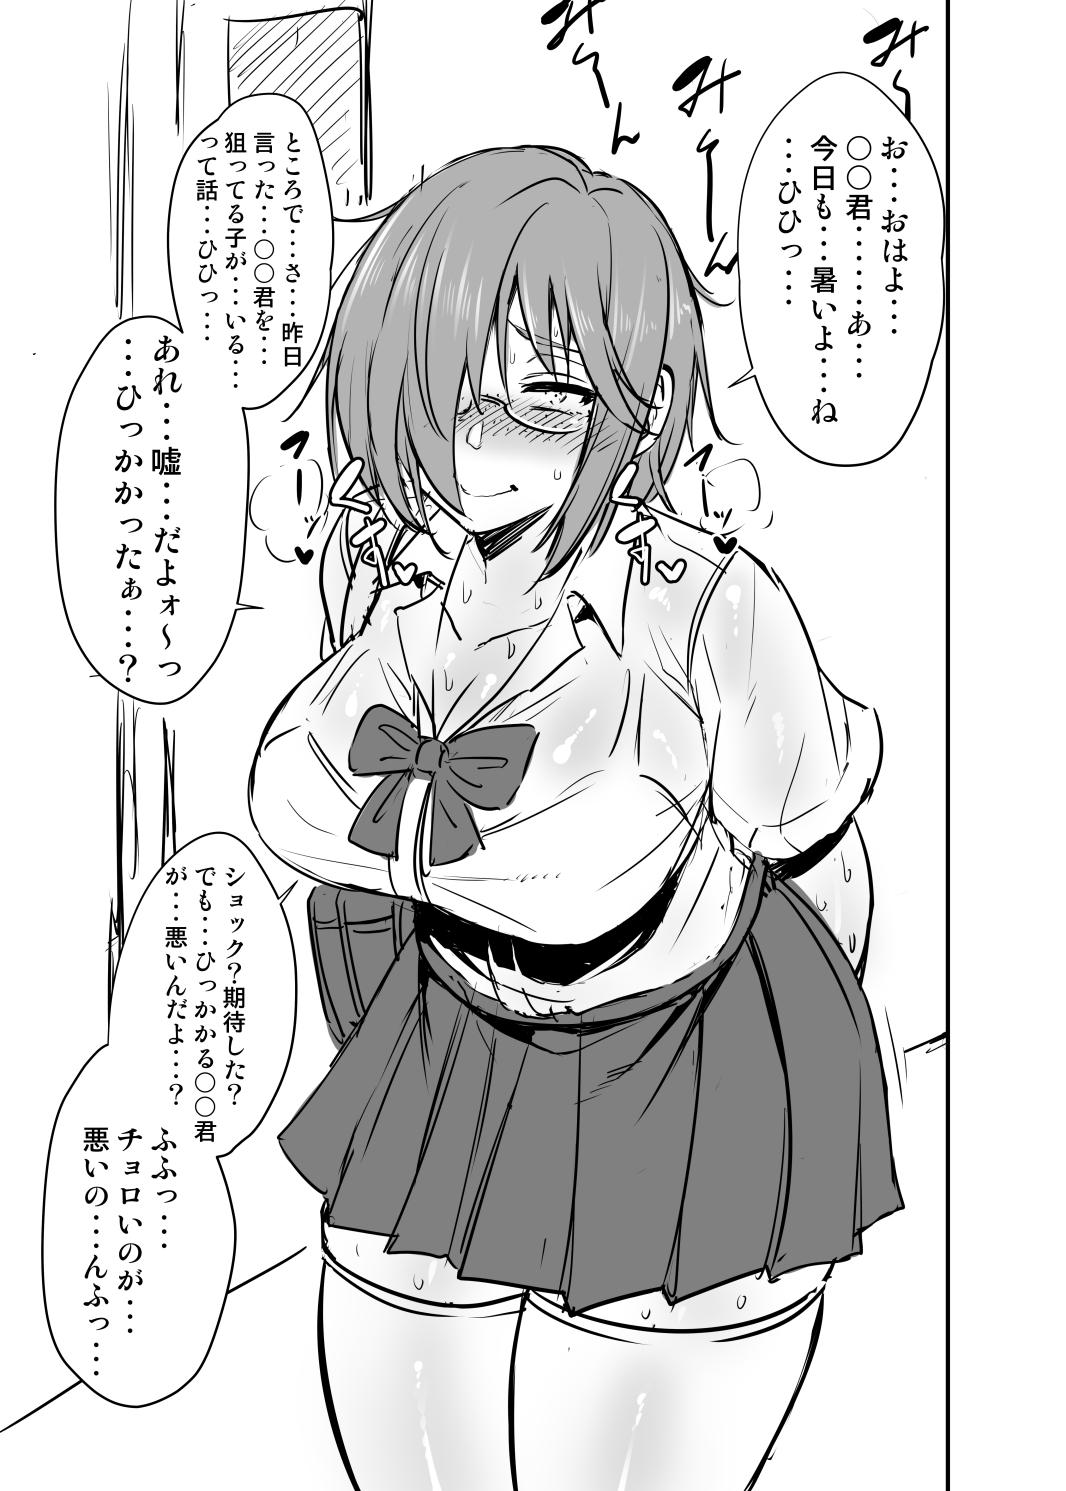 Twink Nekura Megane ♀ - Fate grand order Clothed Sex - Page 5